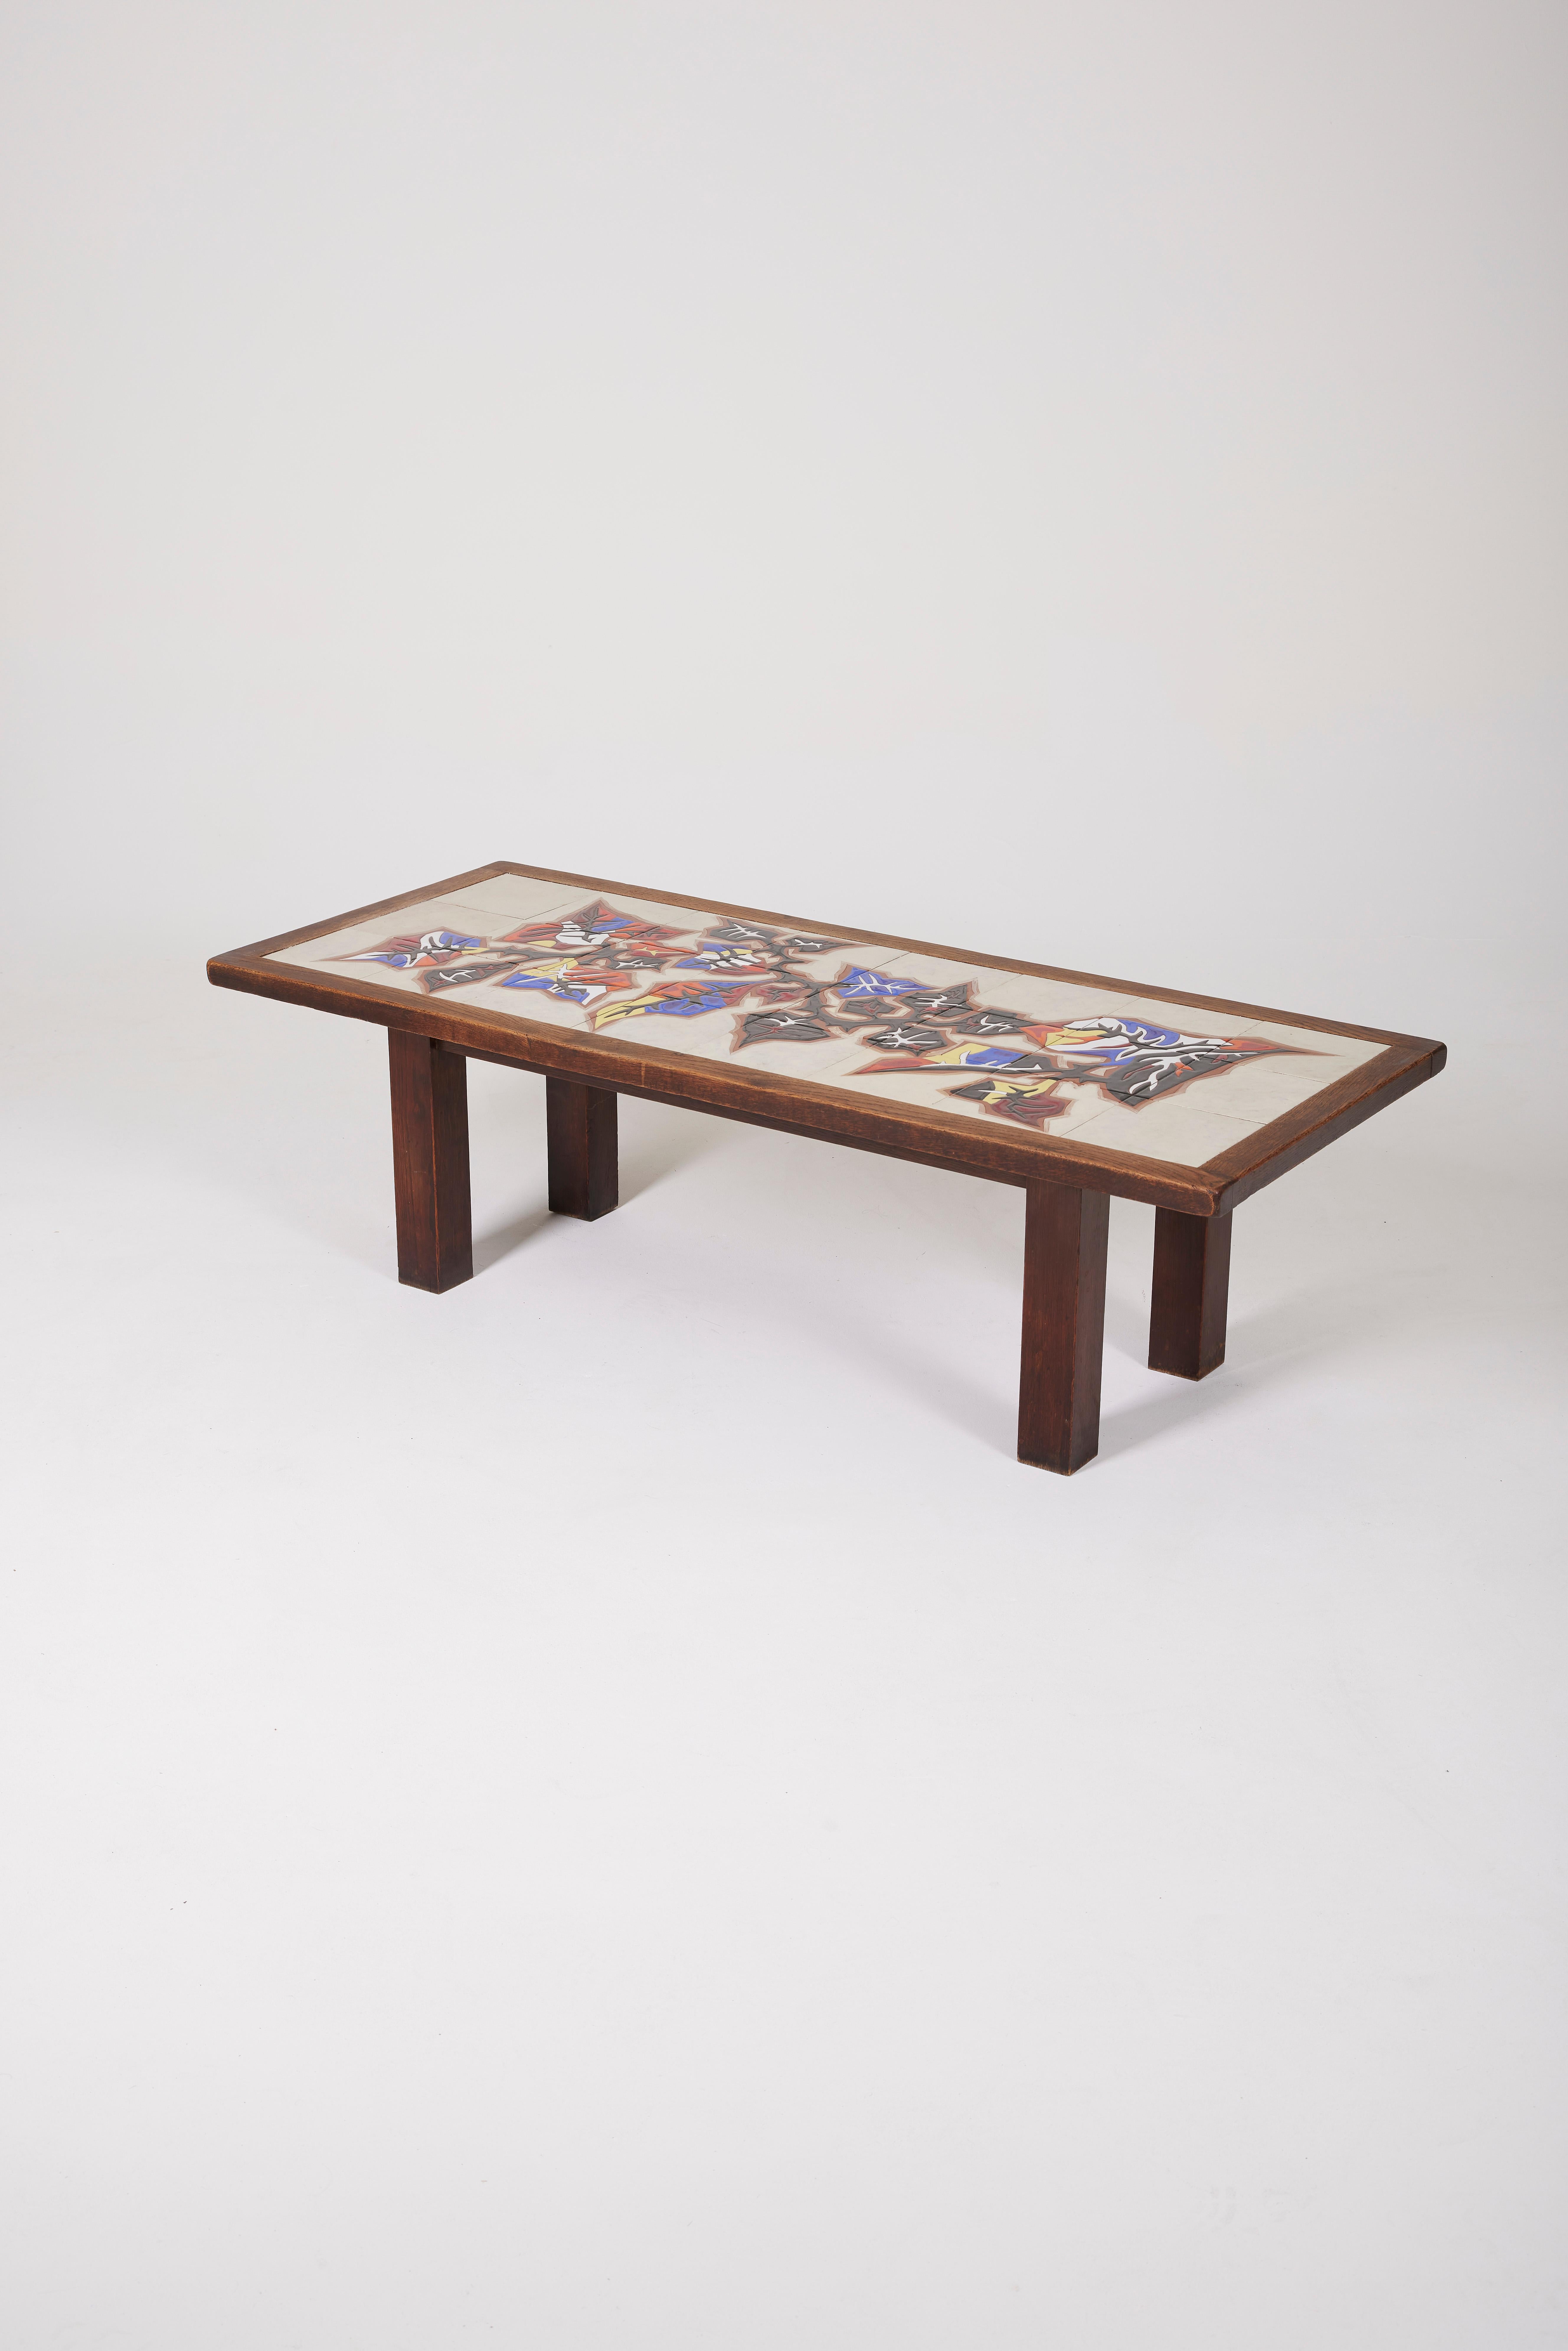 Coffee table in ceramic by the French ceramist Jean Lurçat (1892-1966), dating from the 1950s. The tabletop features white ceramic with yellow, red, and blue floral patterns, while the structure is made of wood. In very good condition.
LP1337